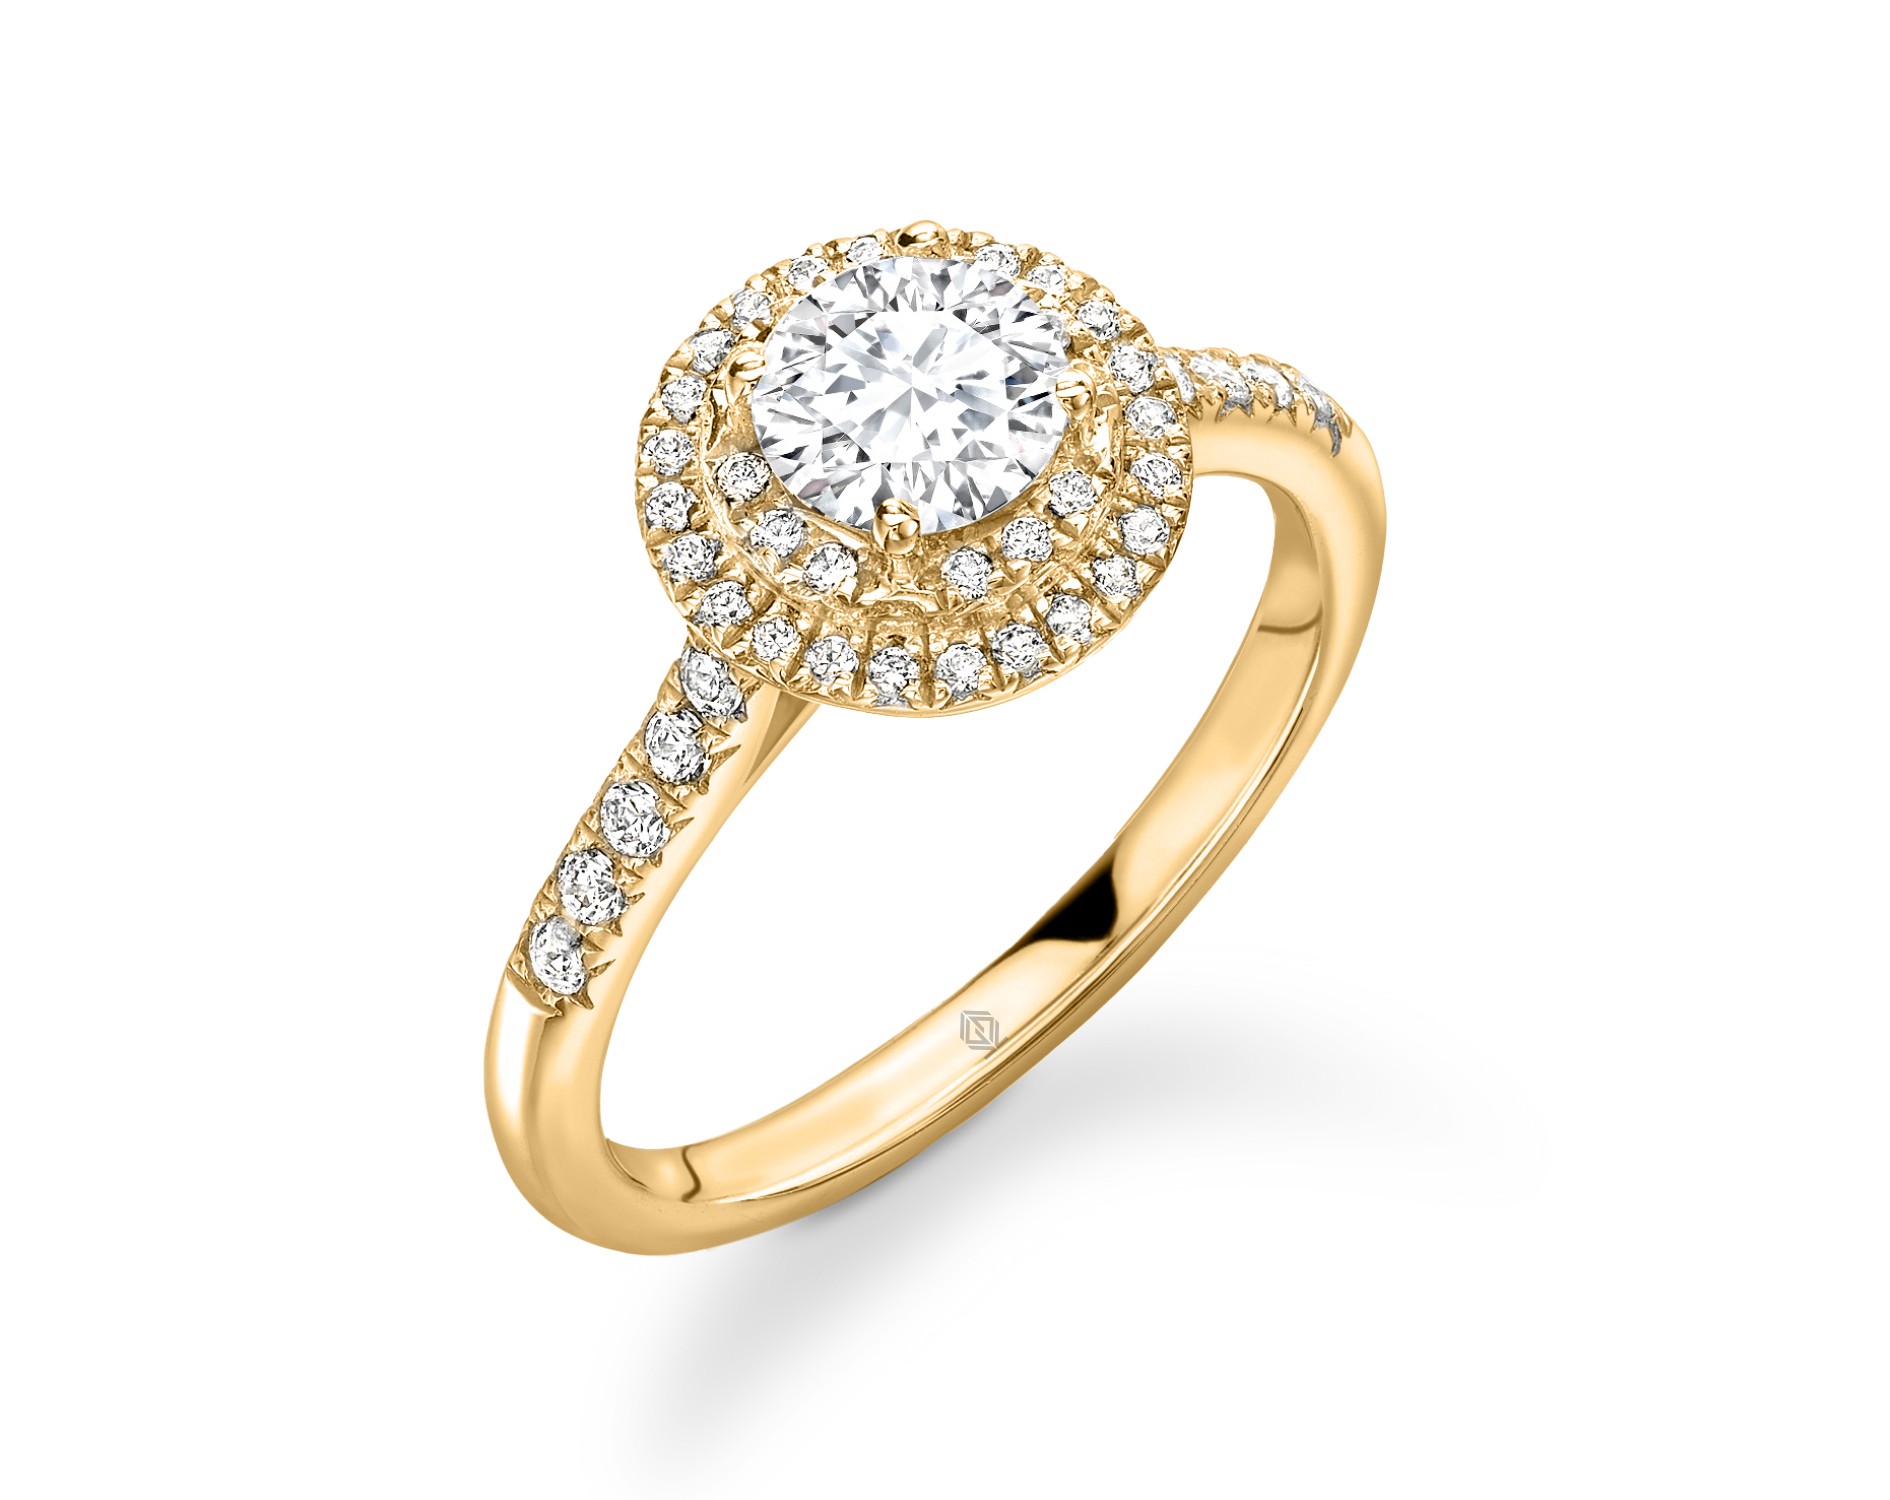 18K YELLOW GOLD DOUBLE HALO ROUND CUT DIAMOND ENGAGEMENT RING WITH SIDE STONES PAVE SET